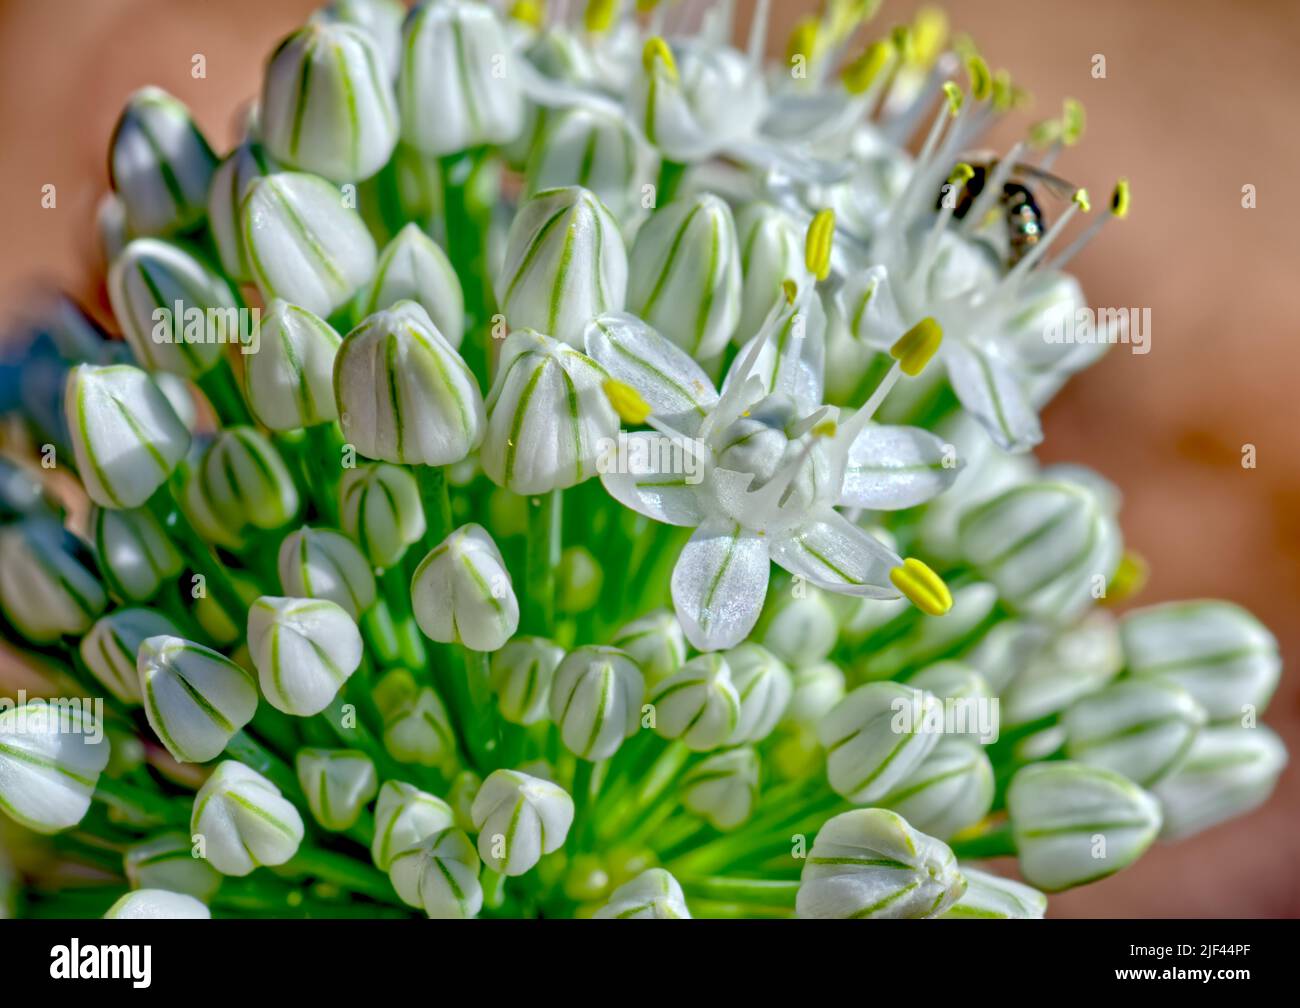 Flower cluster of the common Garden Onion. Botanical name, Allium Cepa. The flowers and green stems are edible. Stock Photo